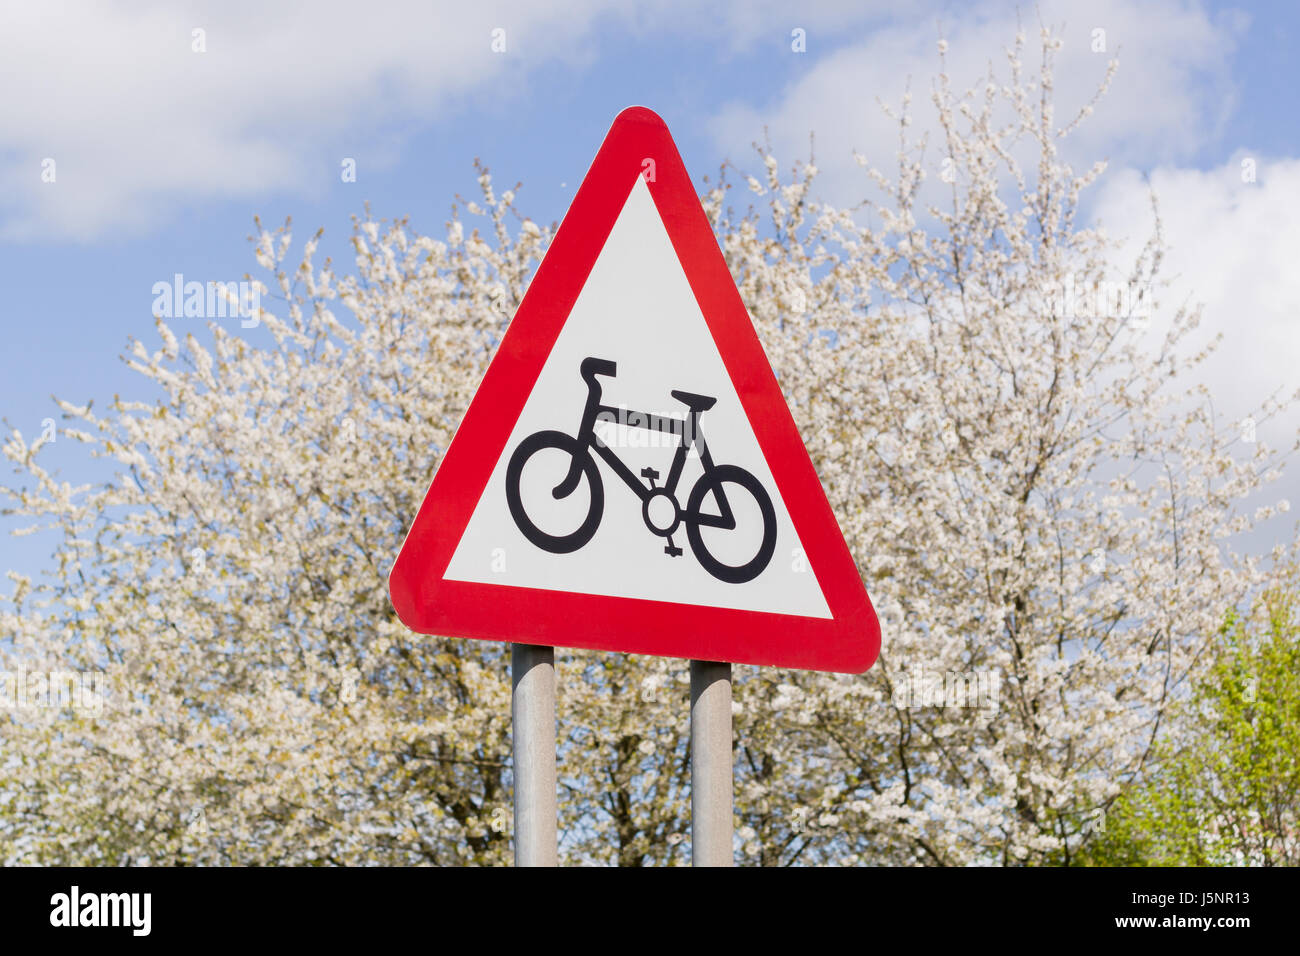 Cycling route sign with blue skies and flower blossoms in the background a useful concept for healthy clean or sustainable transport themes Stock Photo